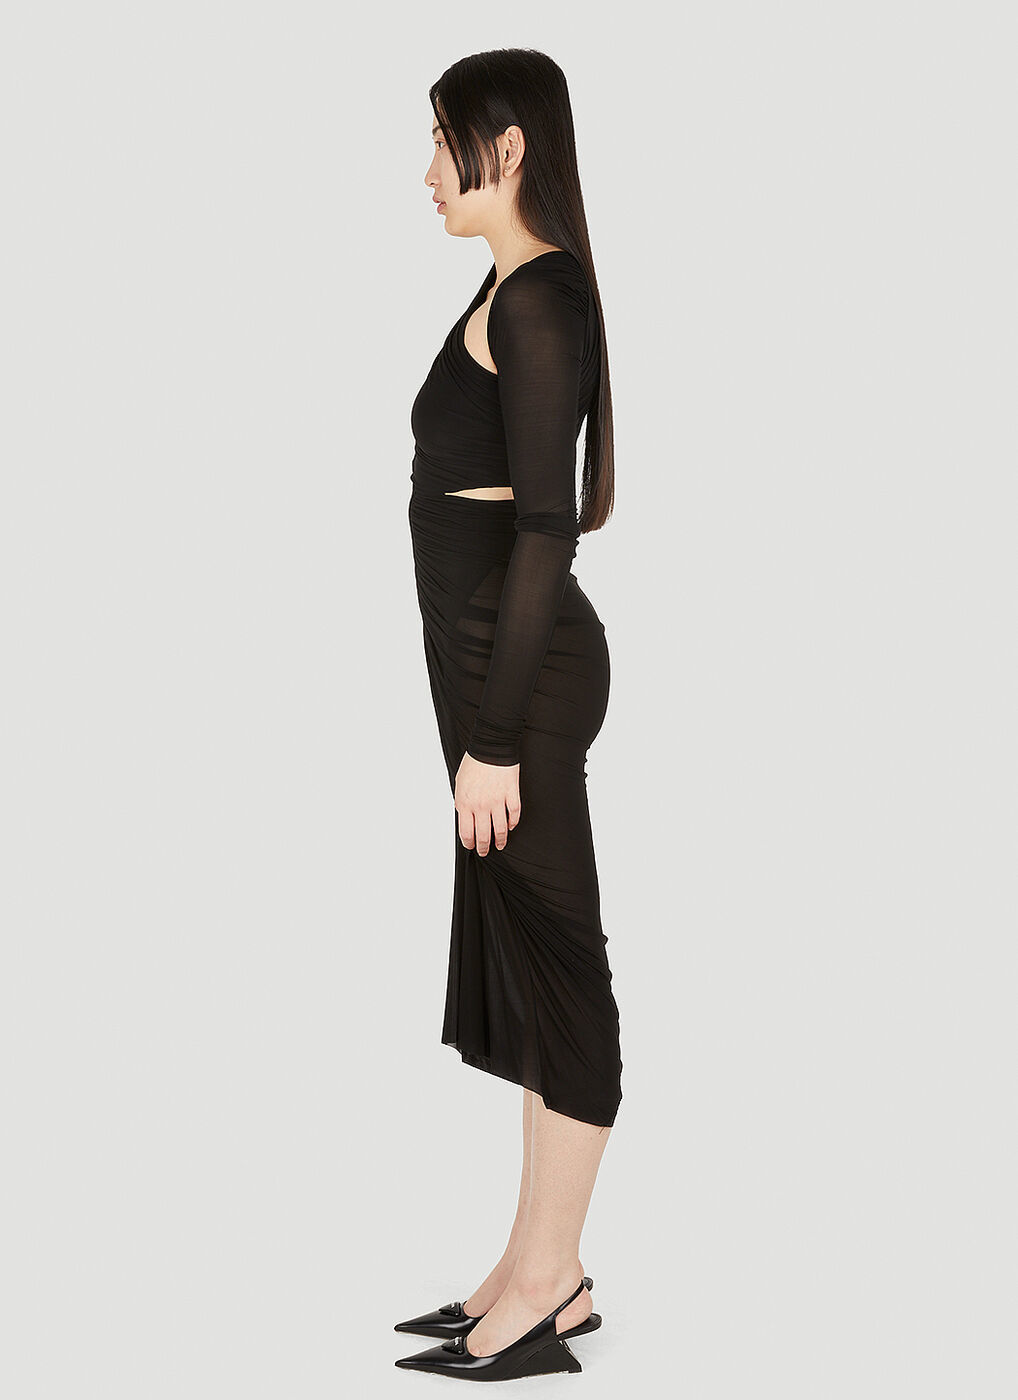 Single Sleeve Ruched Dress in Black